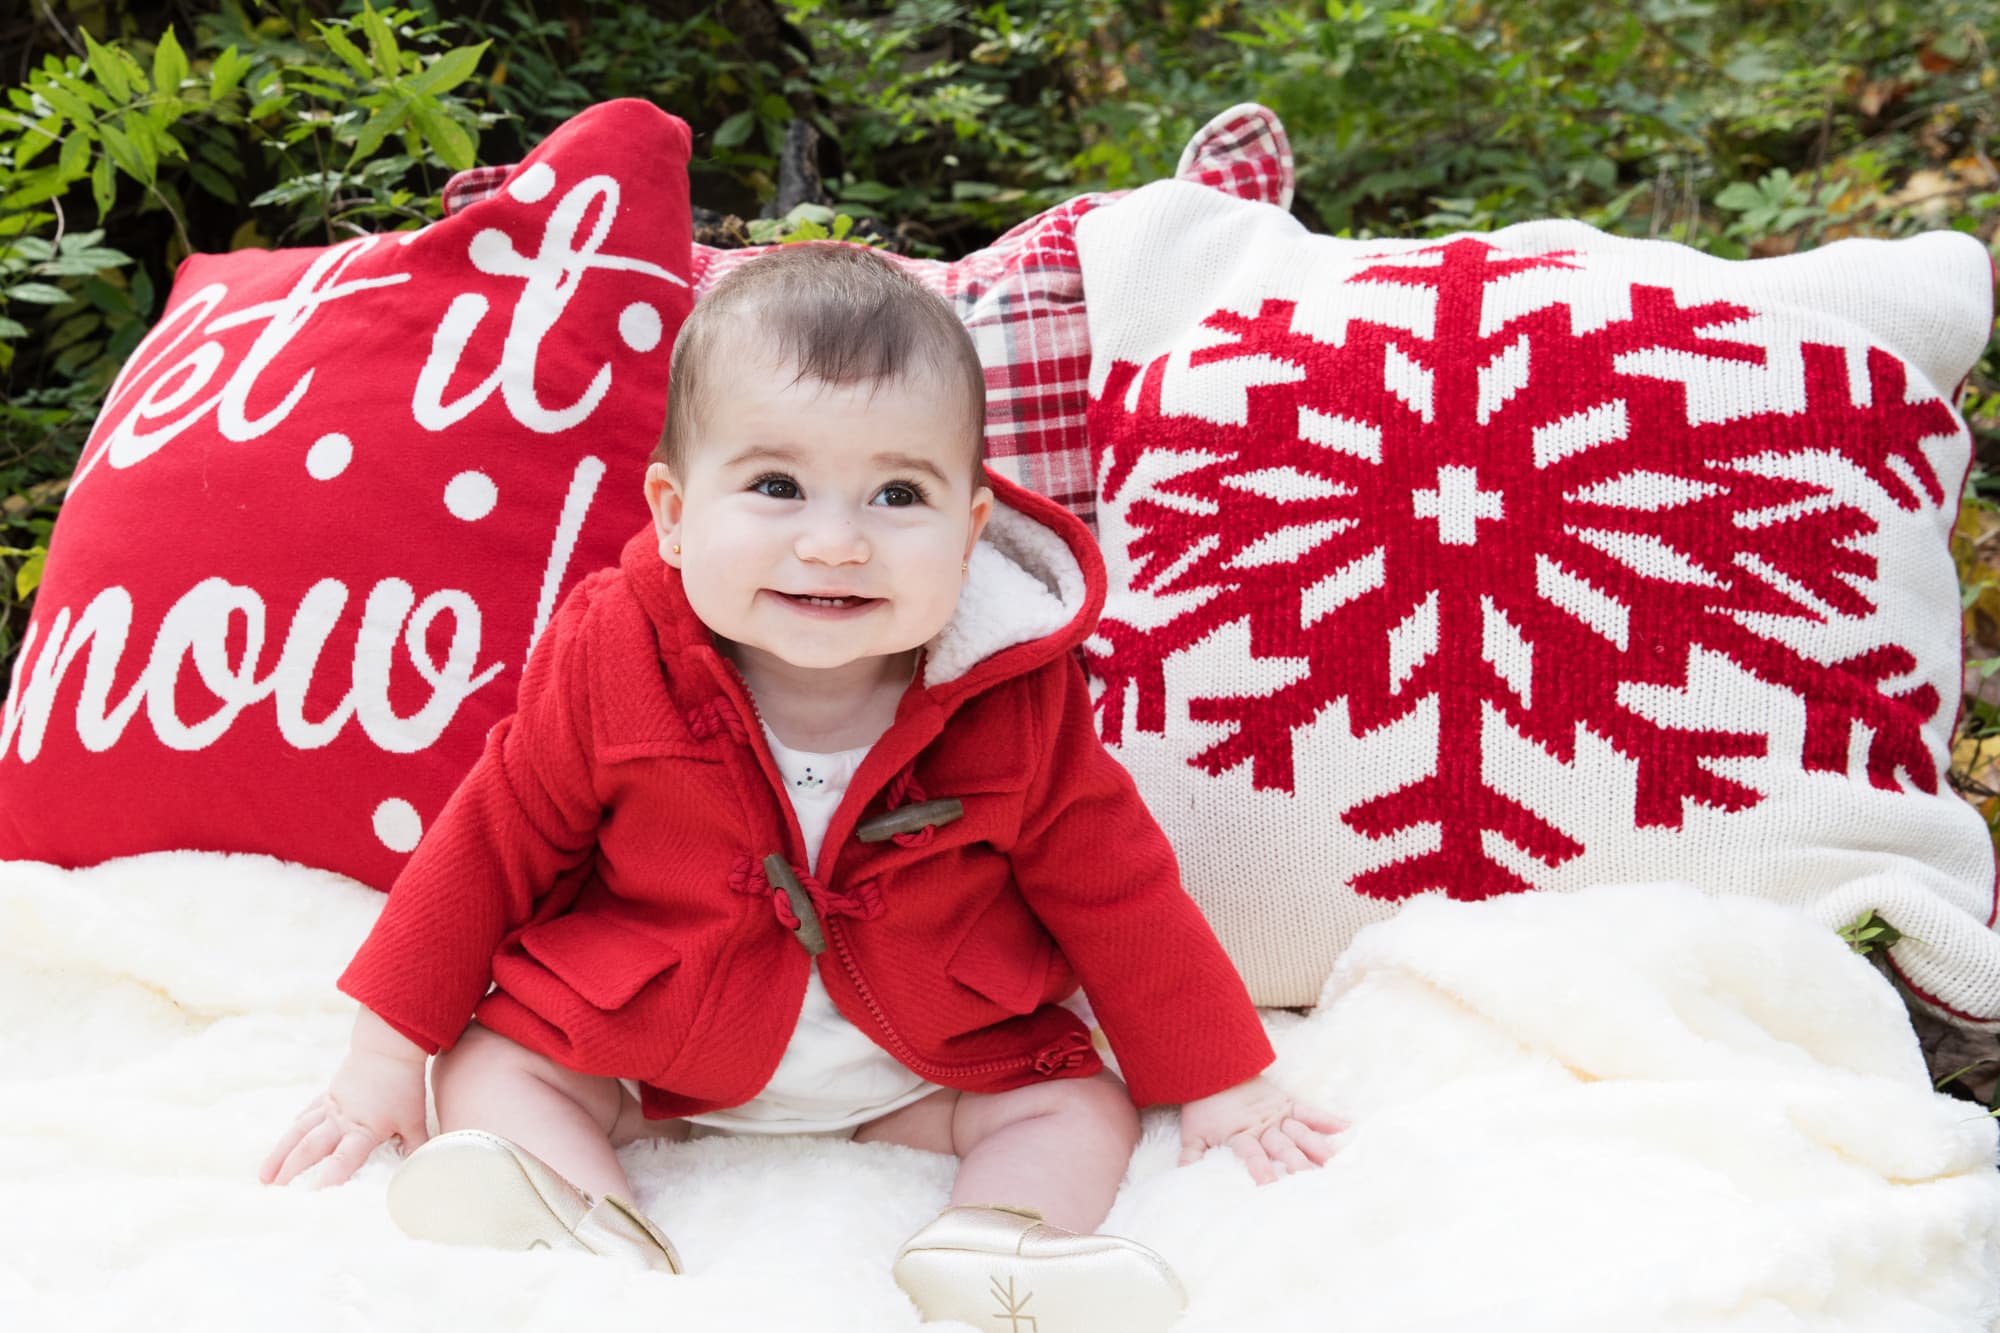 baby in red and white Christmas outfit portrait